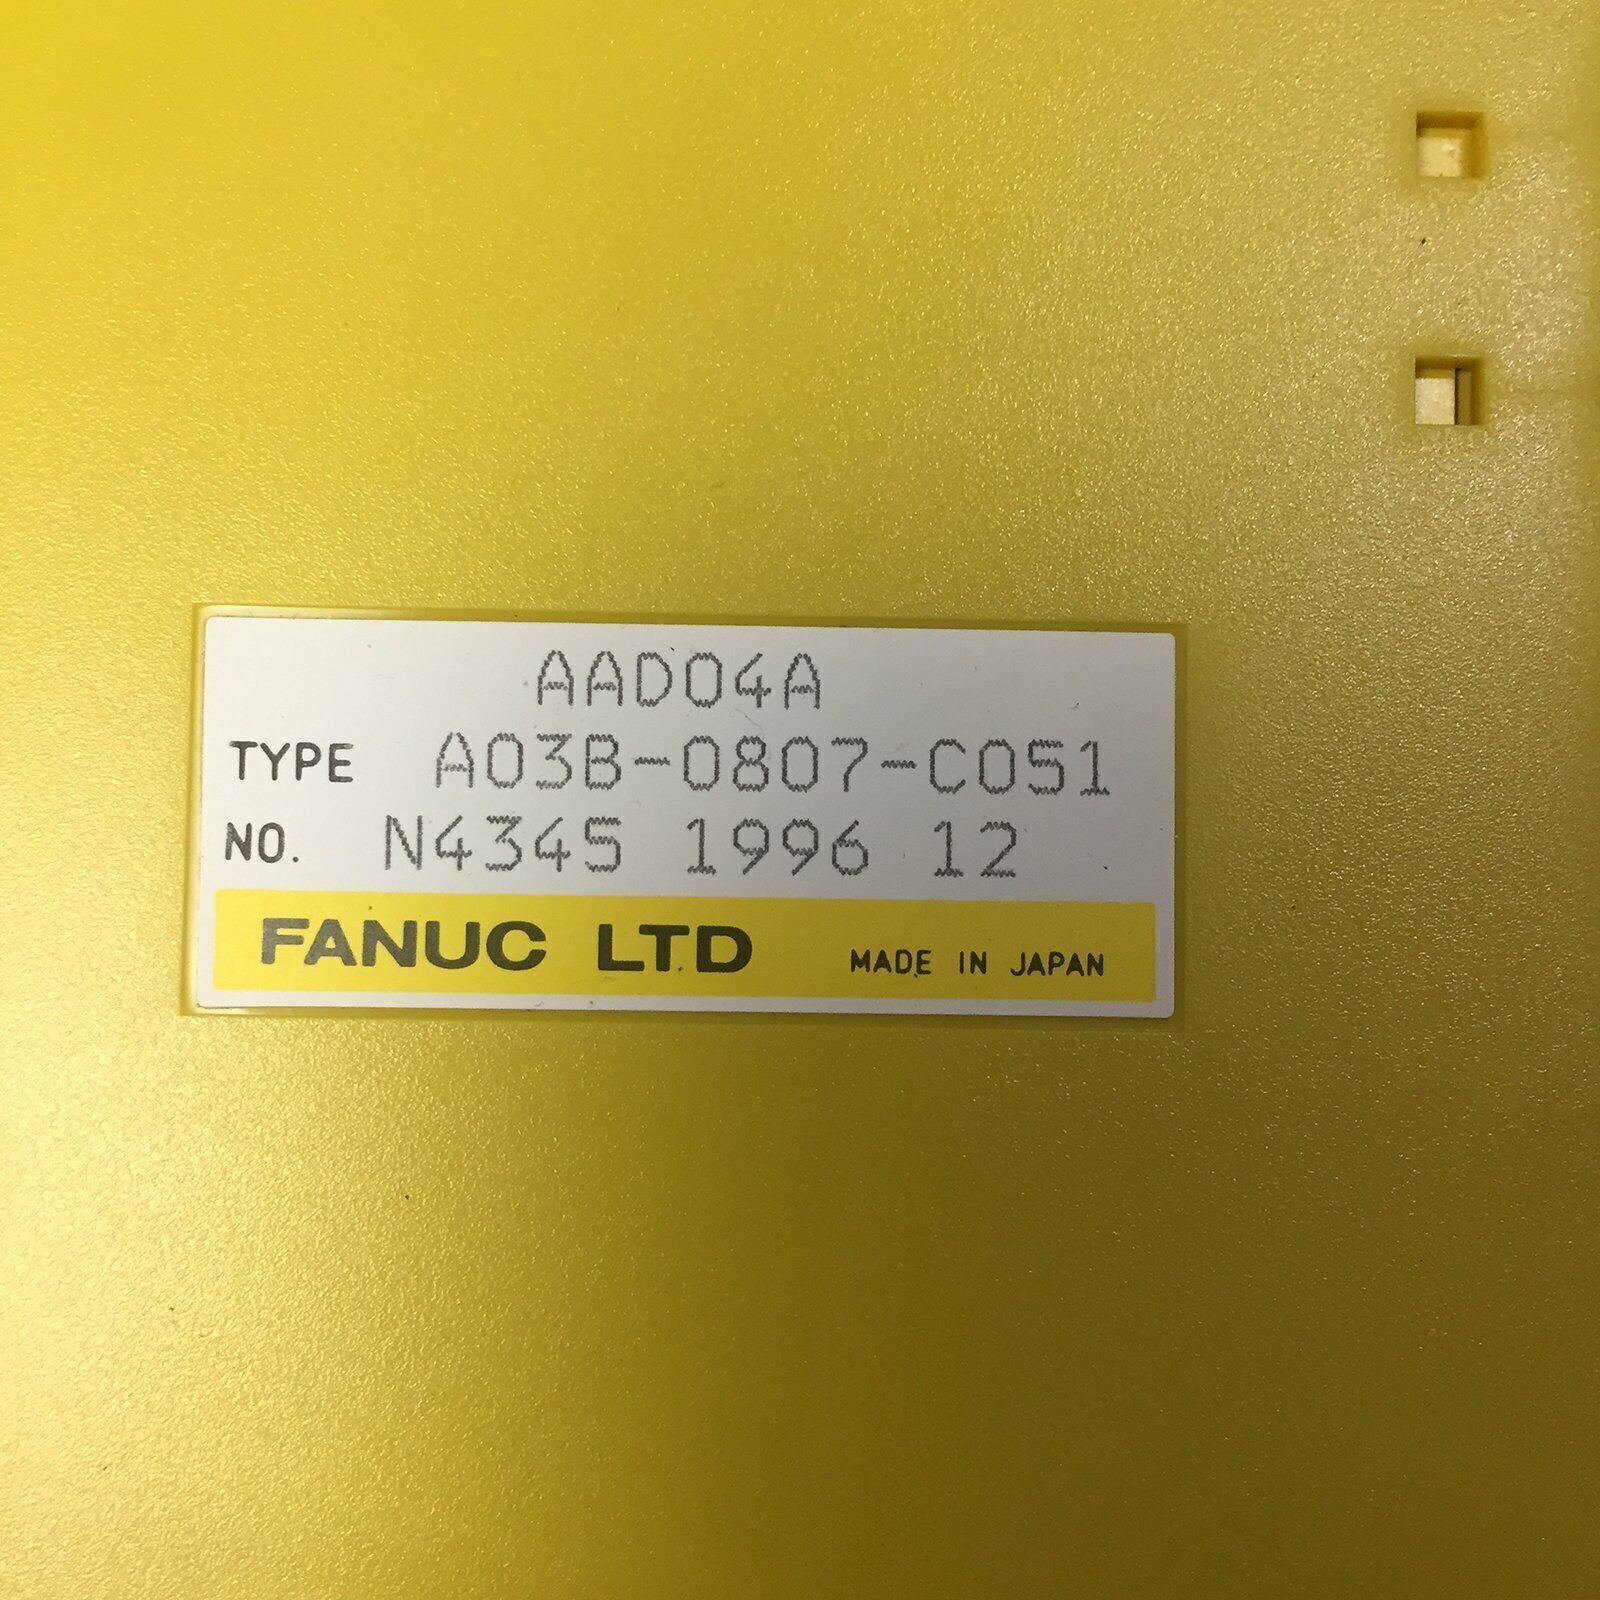 used One  Fanuc A03B-0807-C051 IO module Tested in Good Condition